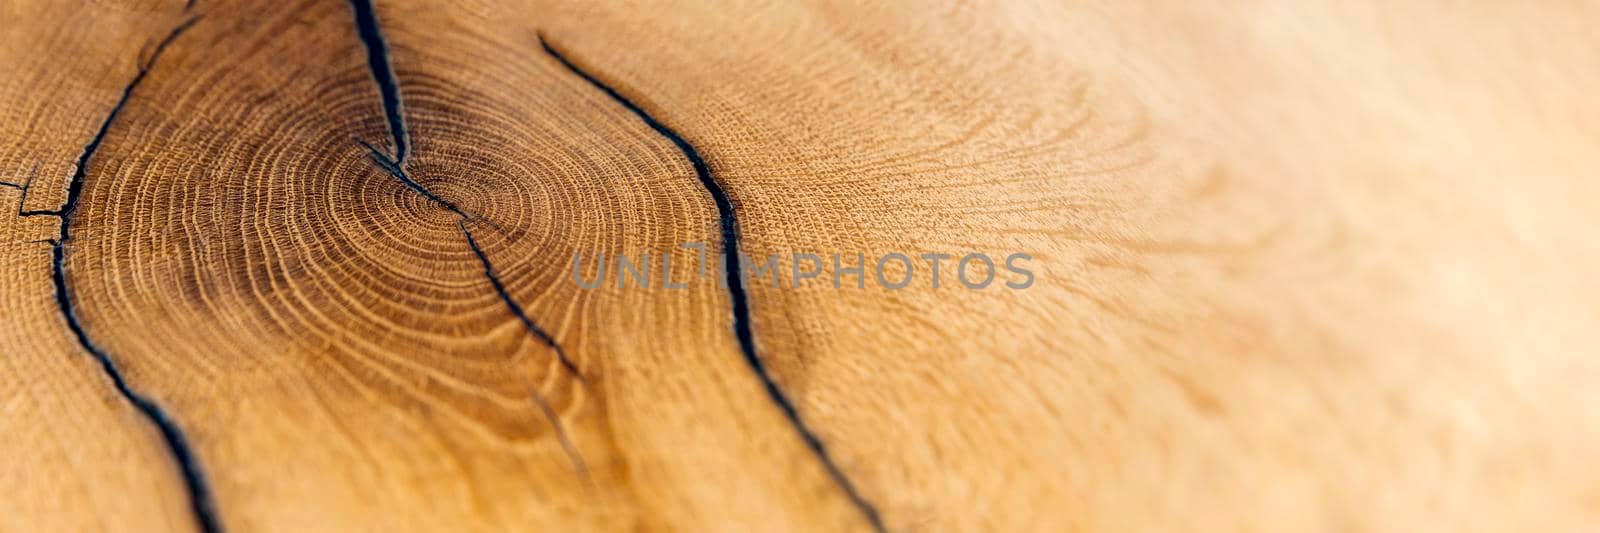 Wood cutting. Felled old oak stump. Wooden background. Sectional top view as background